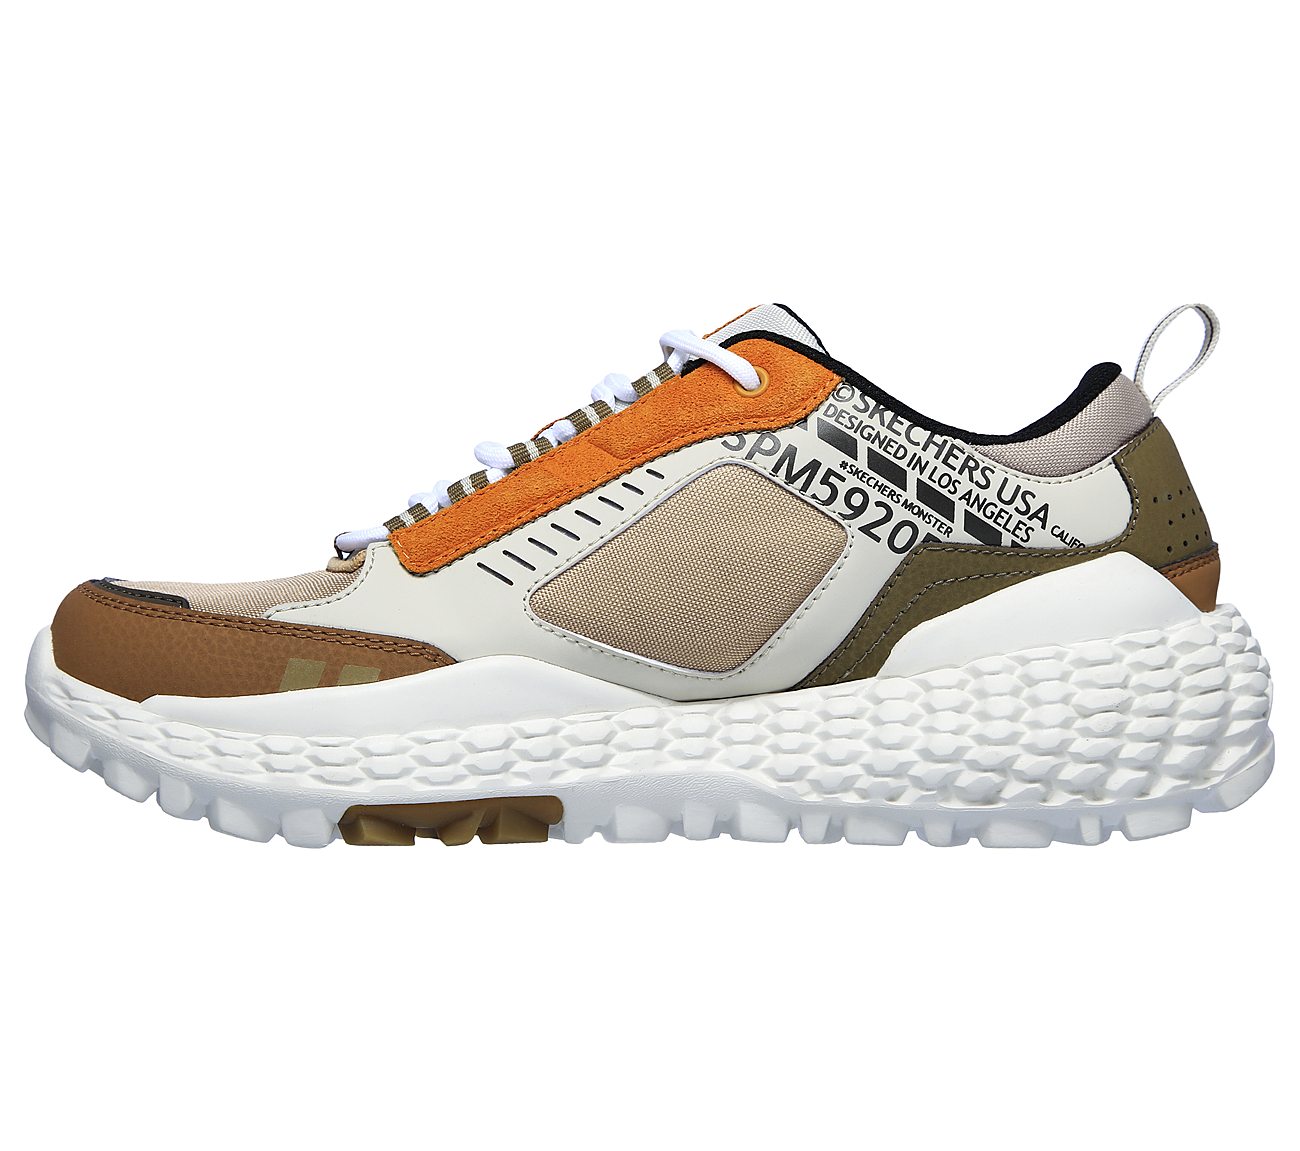 SKECHERS MONSTER, TAUPE/NATURAL Footwear Left View